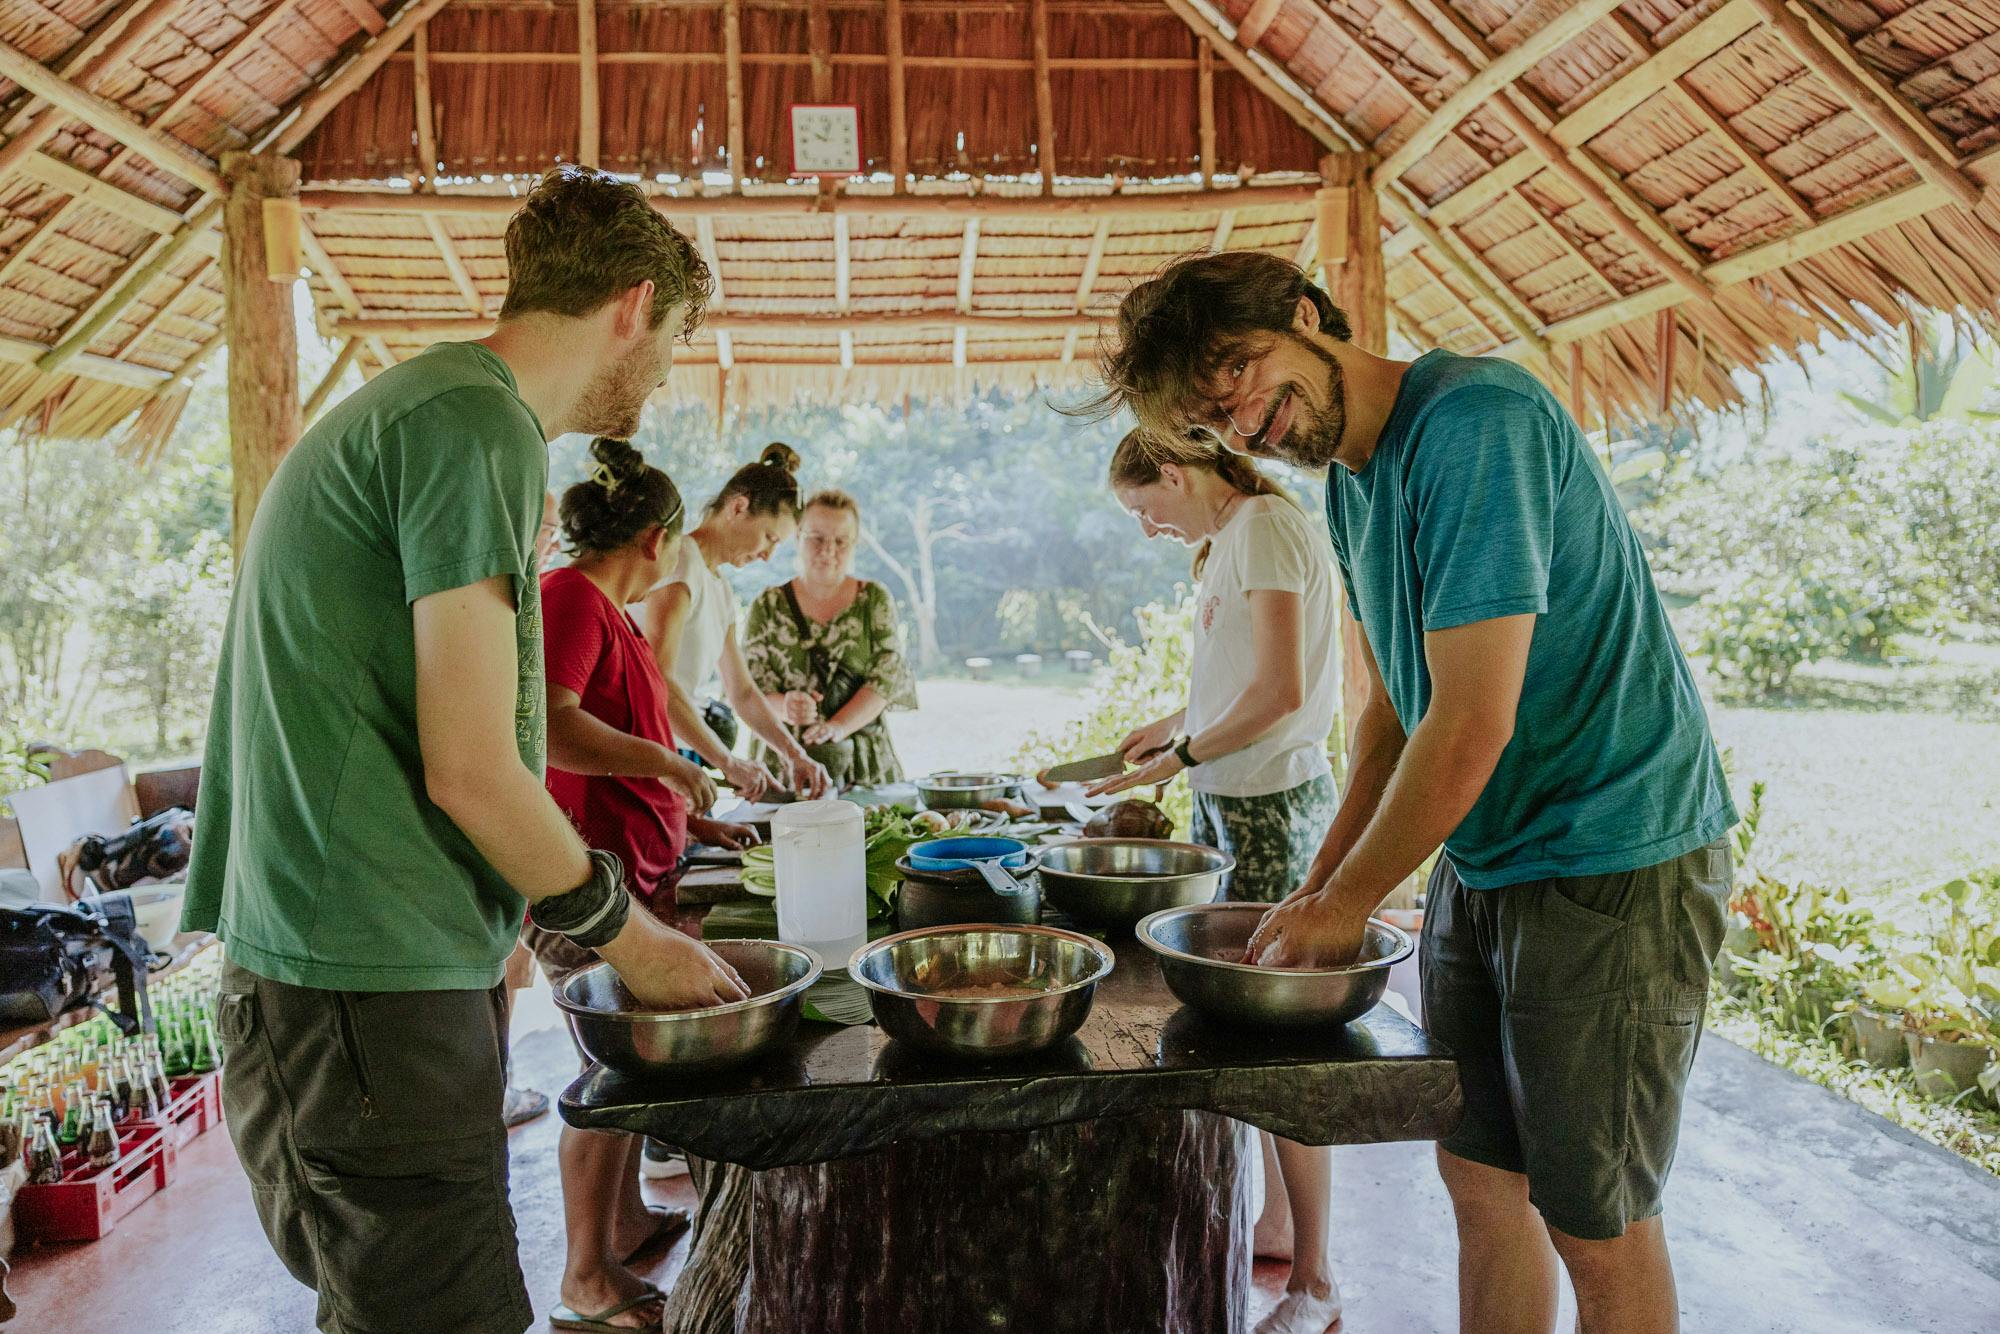 After your lake safari, head into the jungle for a cooking class and learn the secrets of Thai herbs!